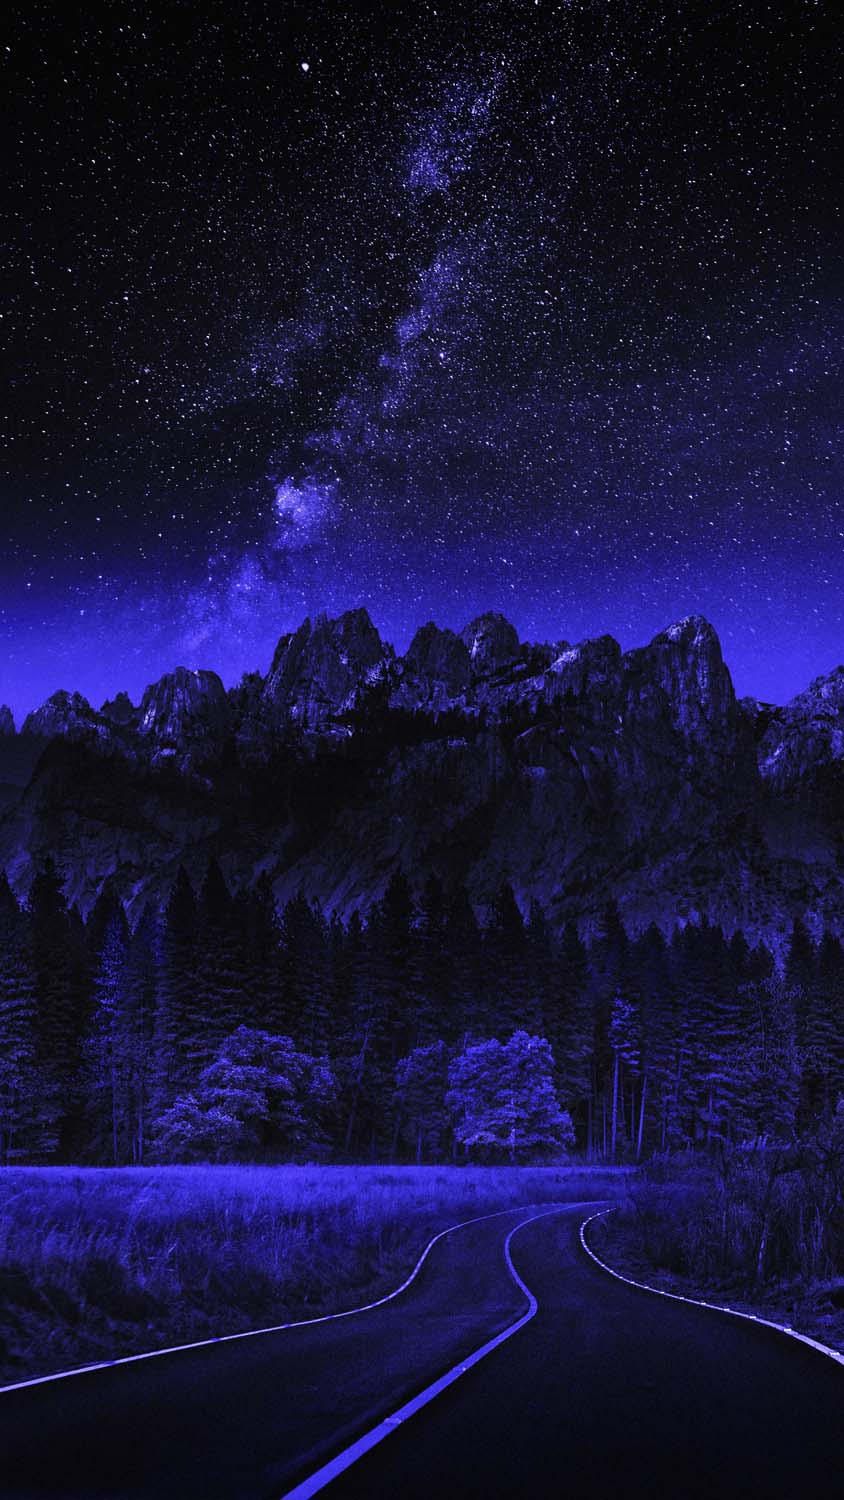 Blue Night IPhone Wallpaper HD - IPhone Wallpapers : iPhone Wallpapers